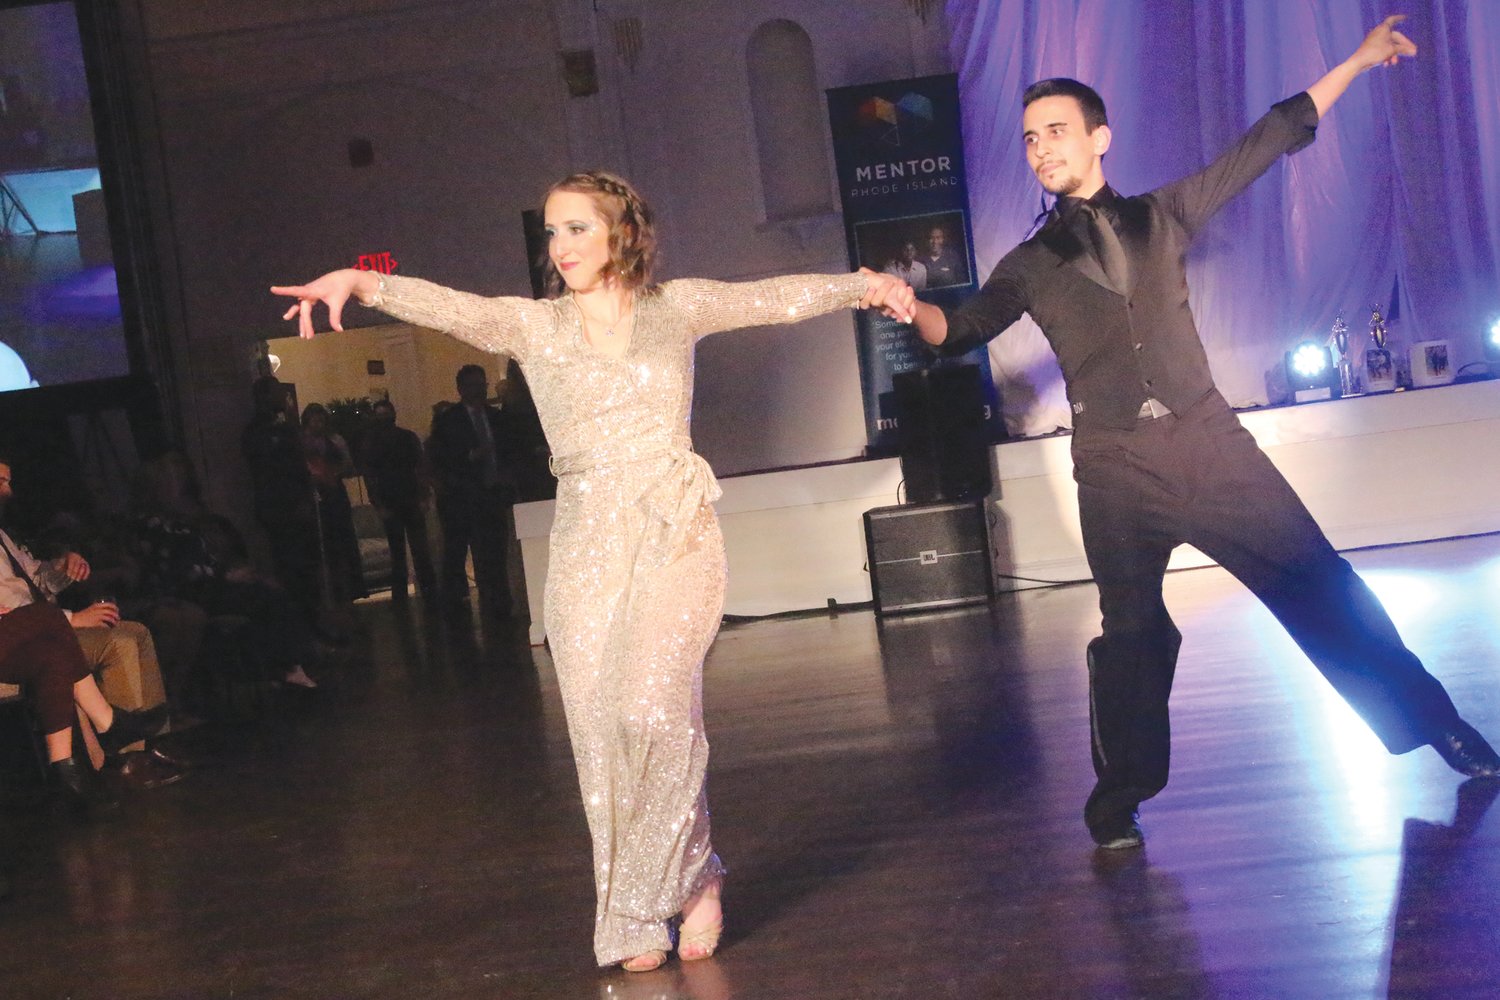 Julie Matthew, a senior manager of Manufacturing at Amgen ended her dance with Anthony Scalzi with a split that had the audience cheering helping her take home the People’s  Choice Award.